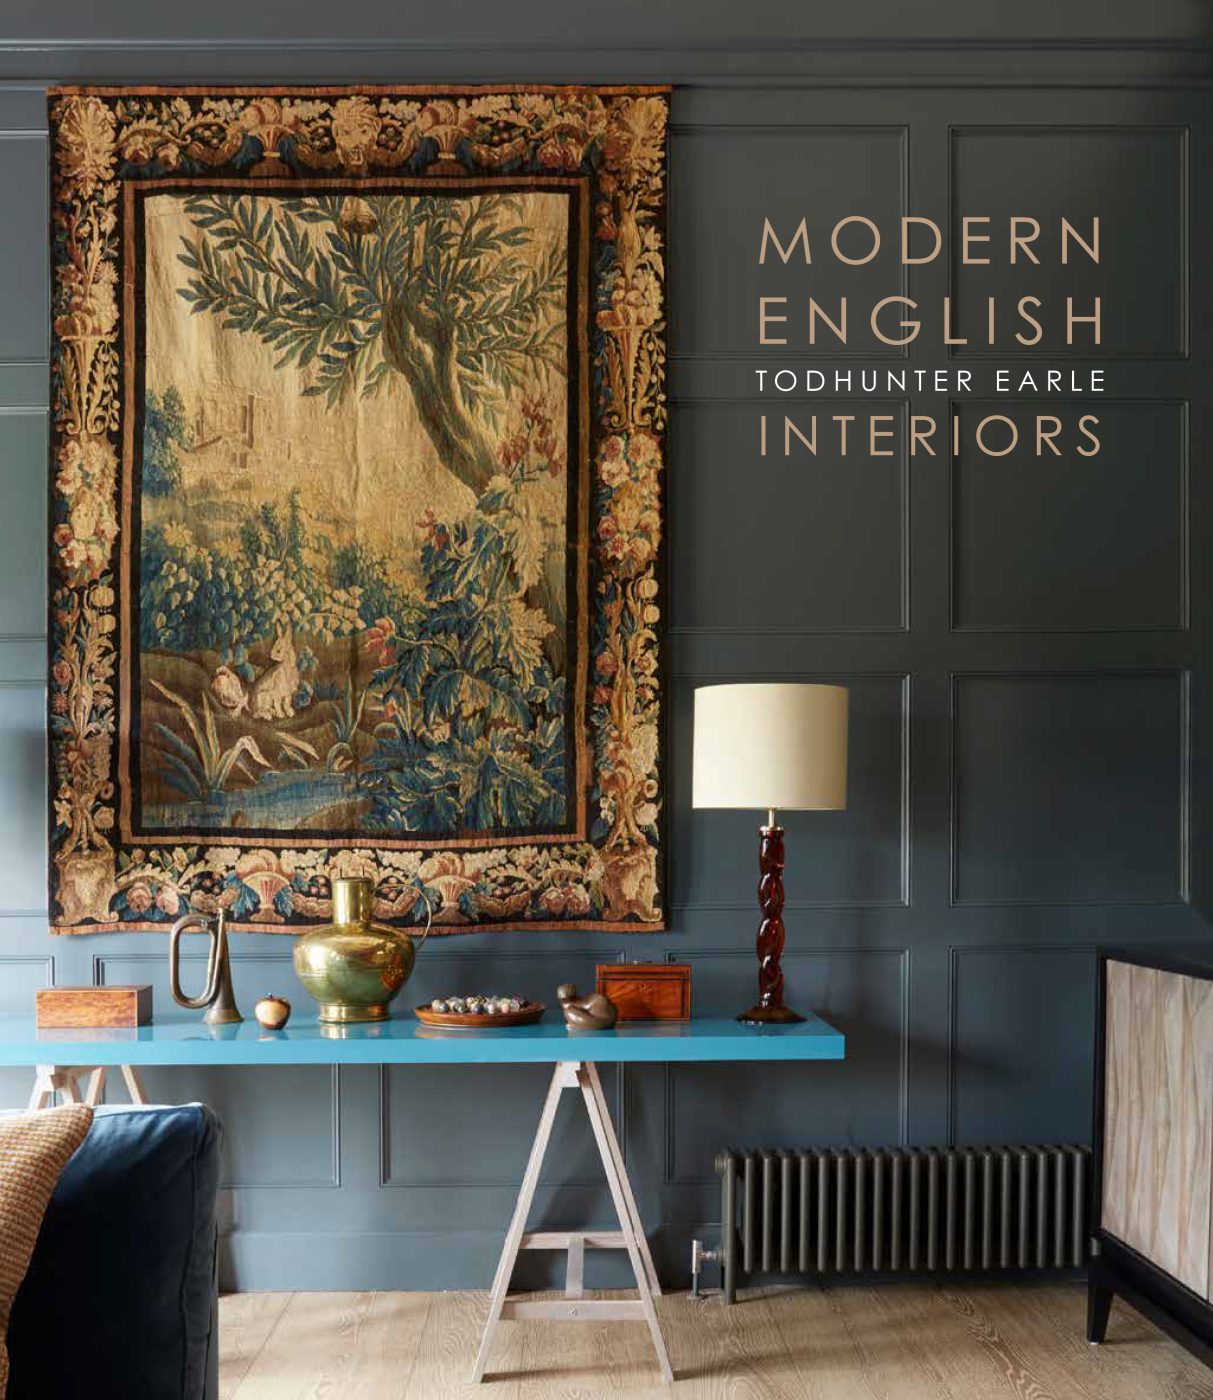 The cover of Modern English from Vendome Press